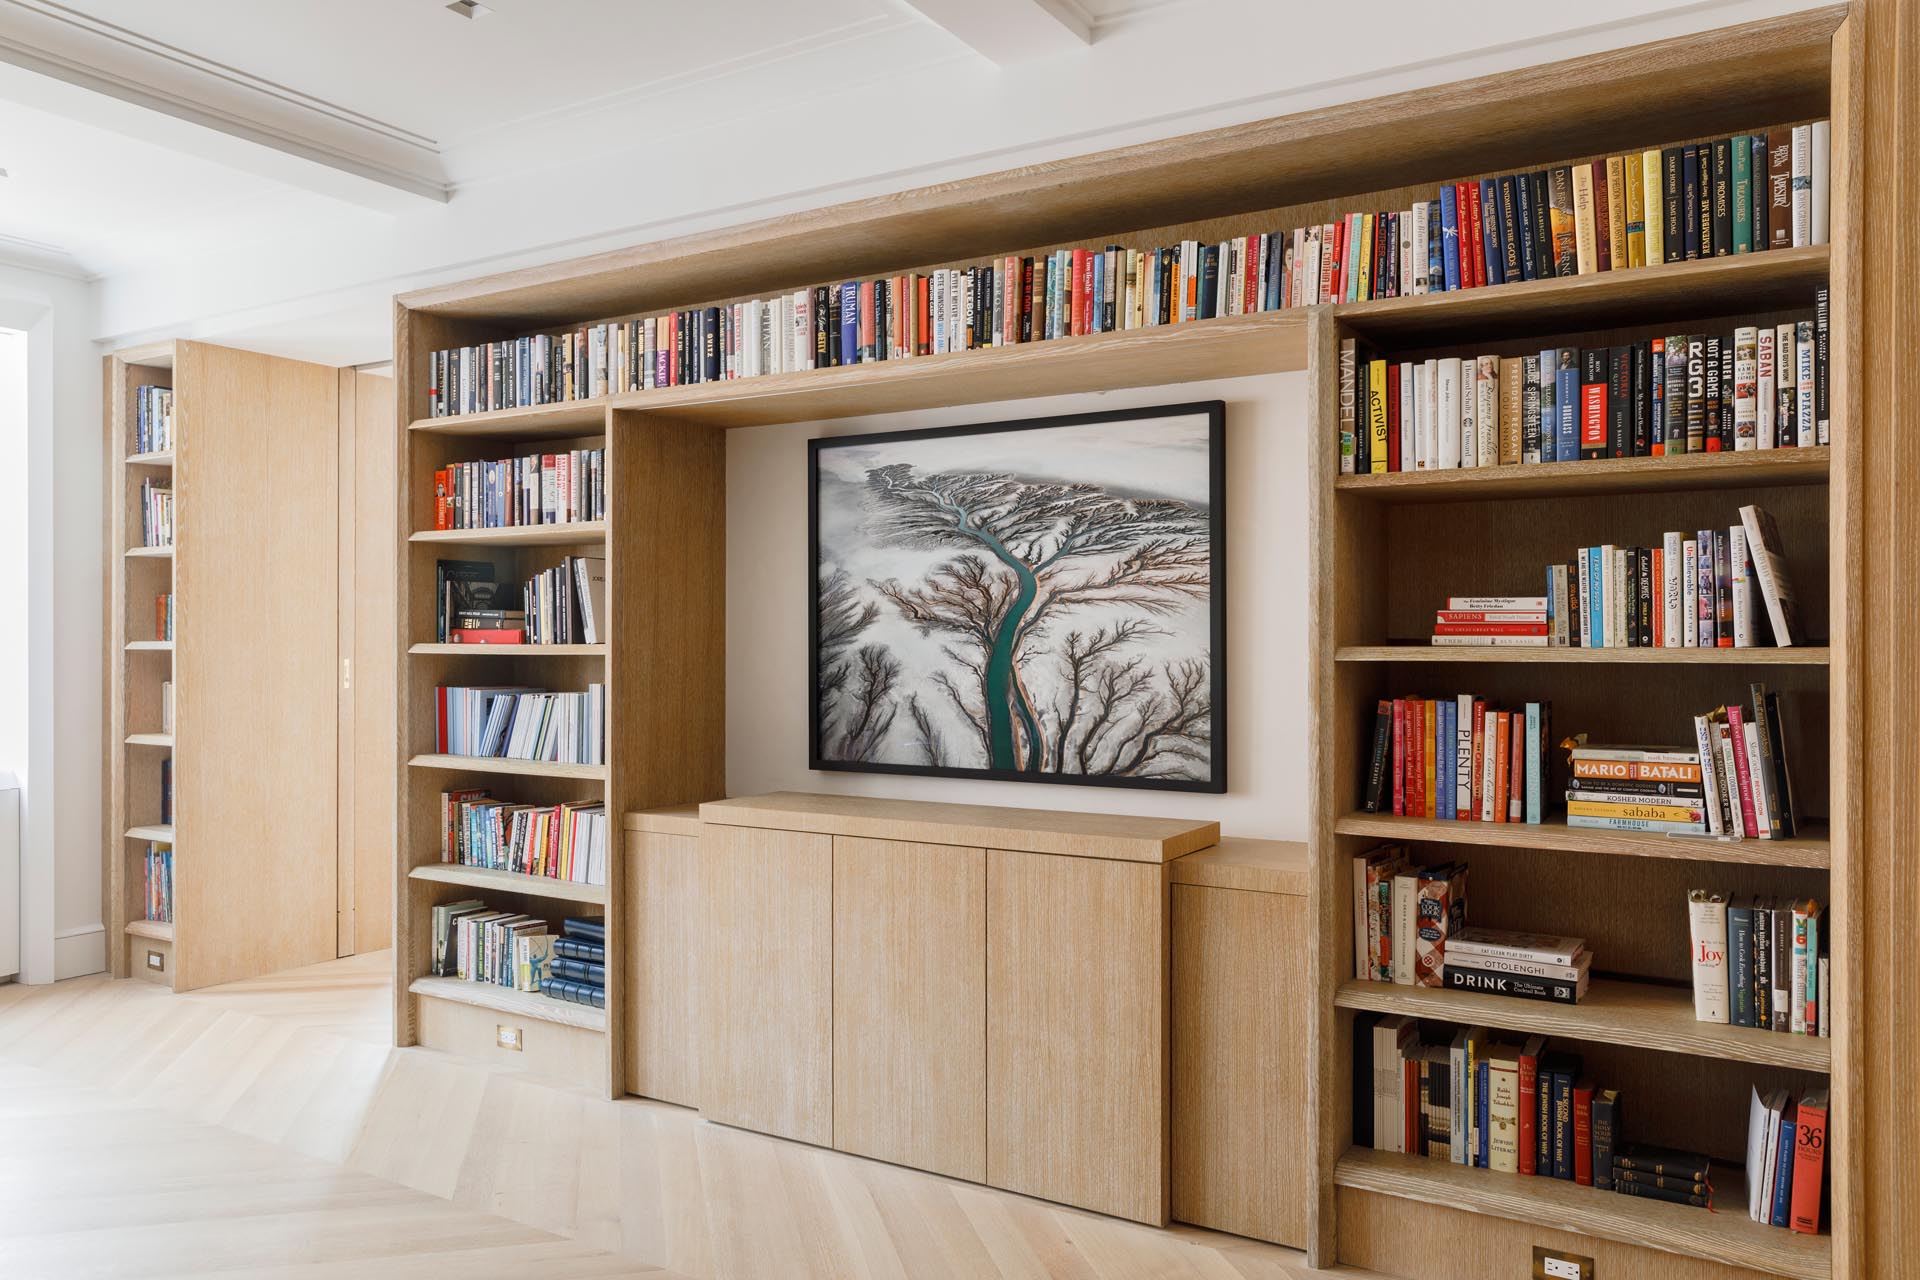 A custom-designed bookshelf surrounds artwork and cabinetry. Within the cabinetry, there's a TV on a concealed motorized lift, and above is photography by Edward Burtynsky